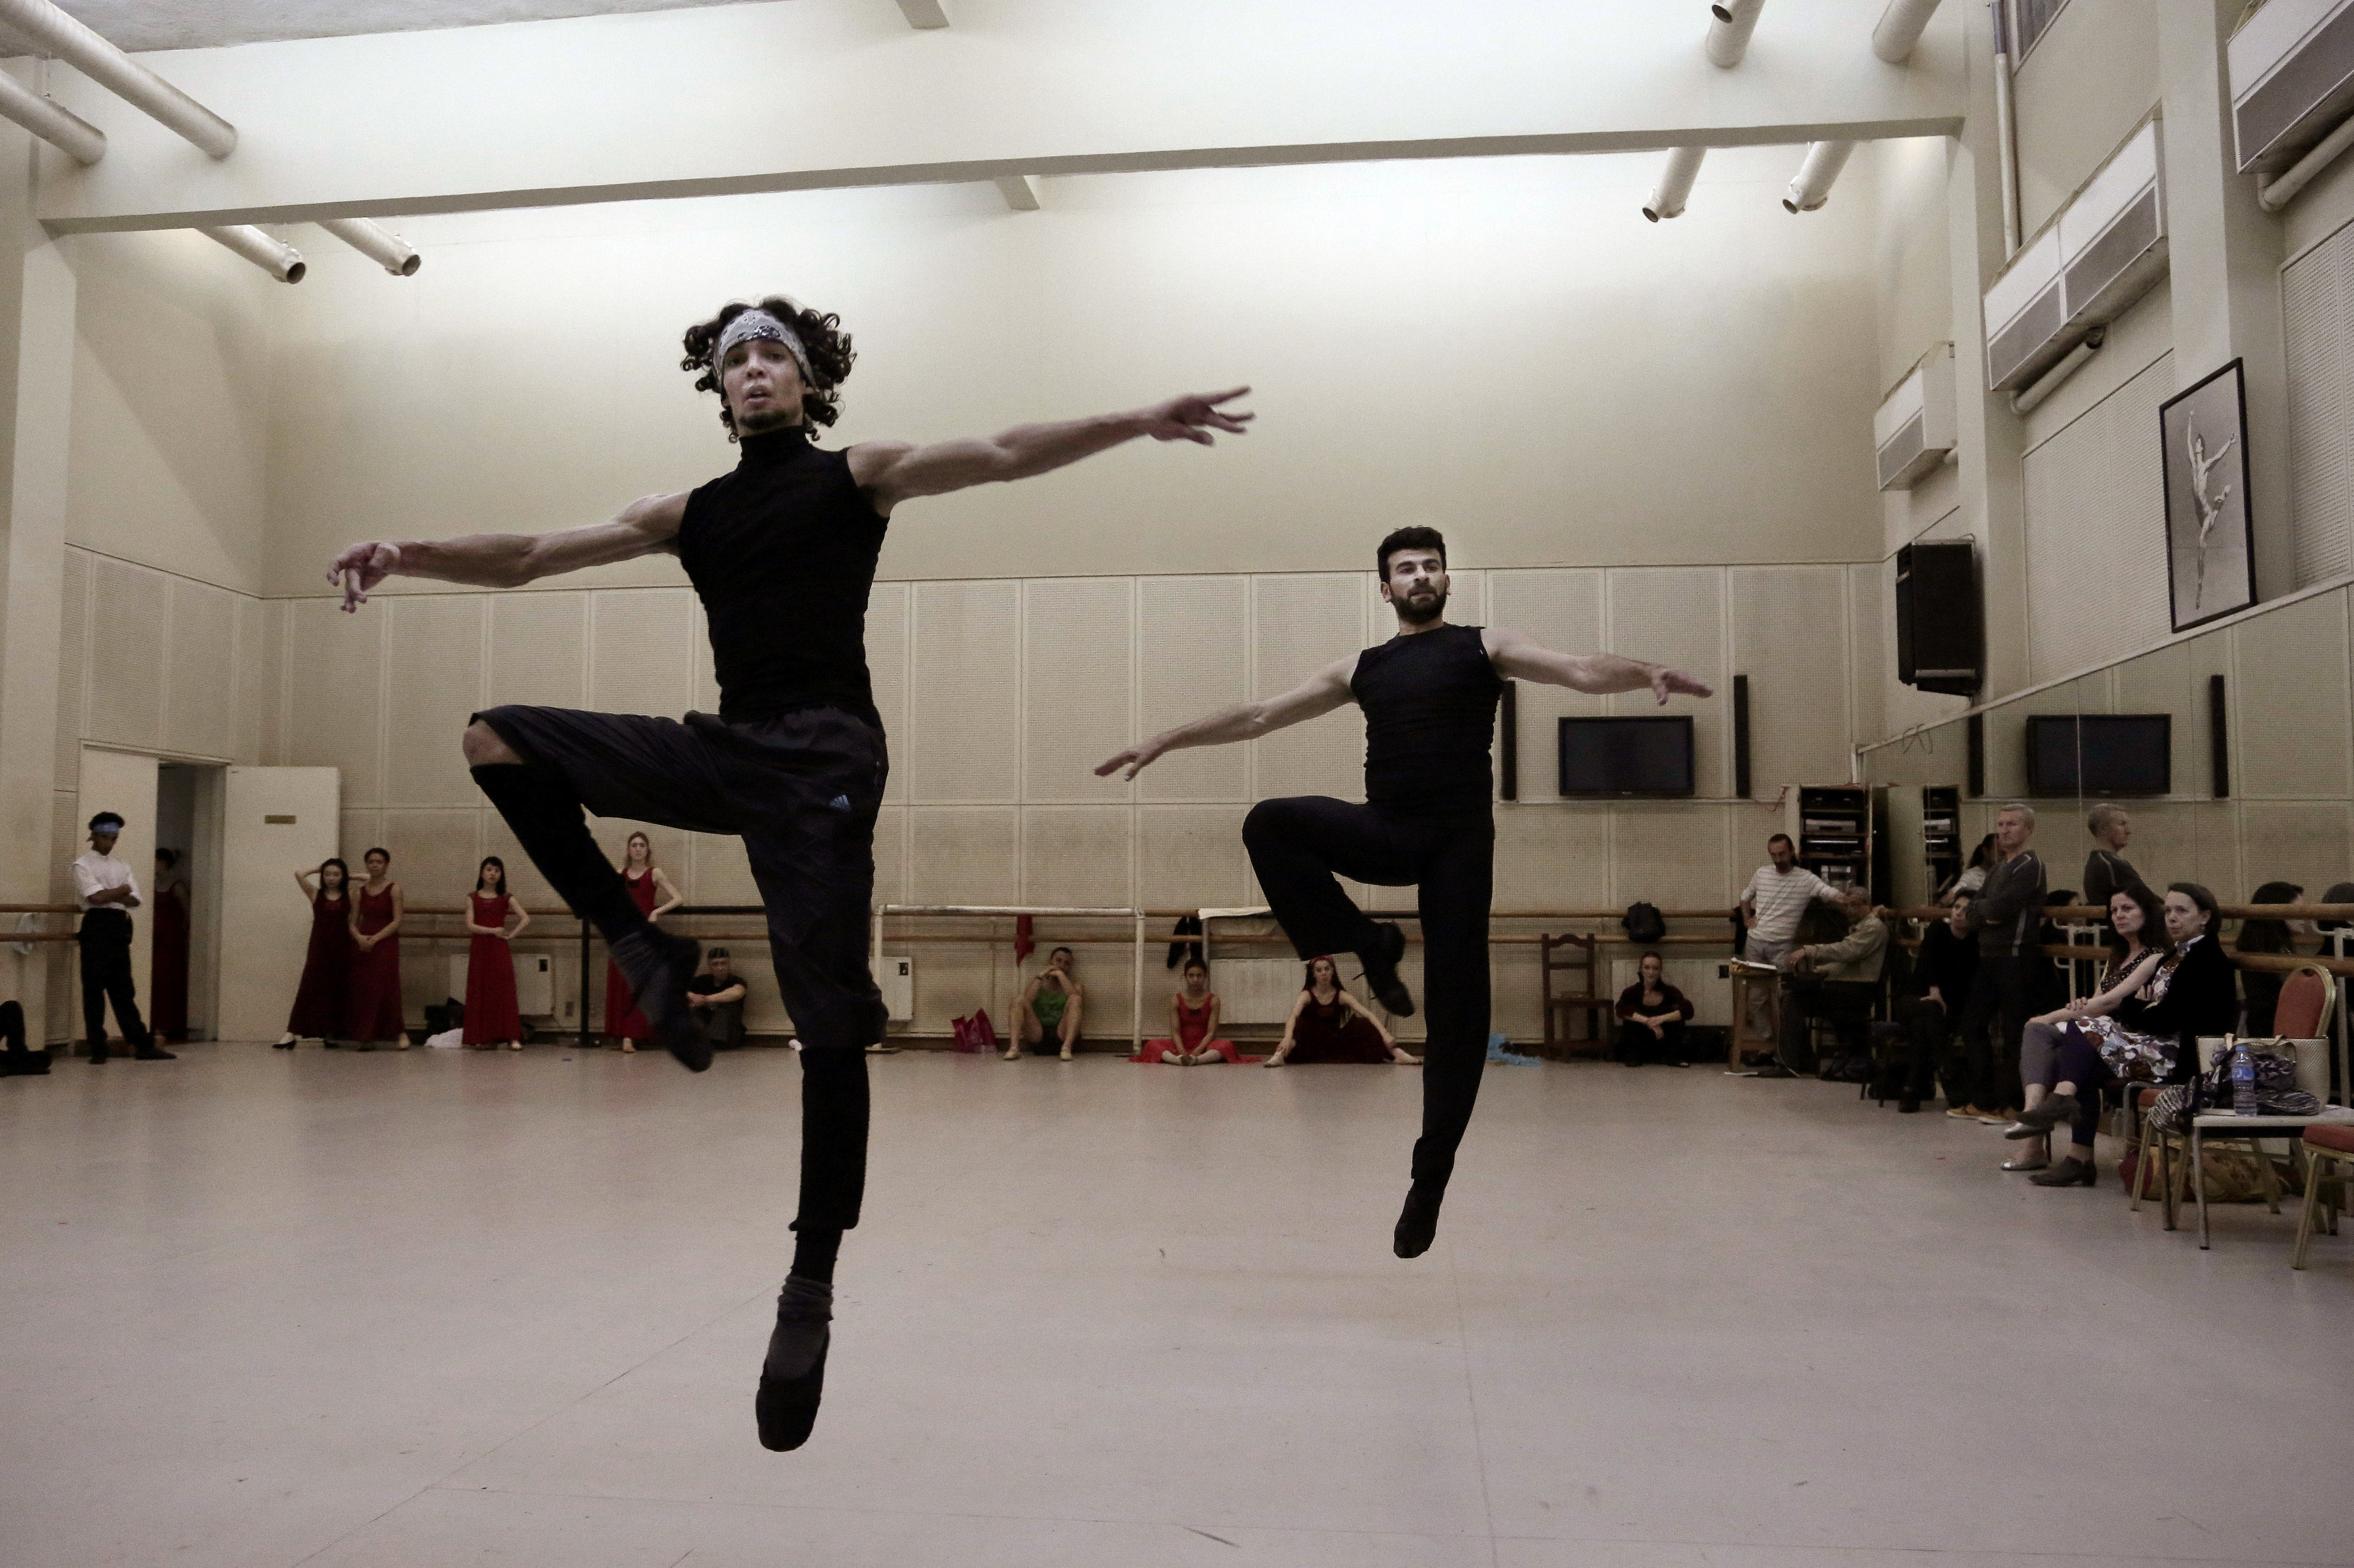 In this March 23, 2017 photo, Ahmed Nabil, left, Hani Hassan, practice during a rehearsal, in the Cairo Opera House, Egypt. The national ballet company is rebuilding after years of political turmoil and economic pain. Ballet may be an elite Western art, it may be far removed from Egyptian society, which has grown more religiously conservative and xenophobic. But it’s still a powerful passion for the Egyptians who dance it and watch it. (AP Photo/Nariman El-Mofty)